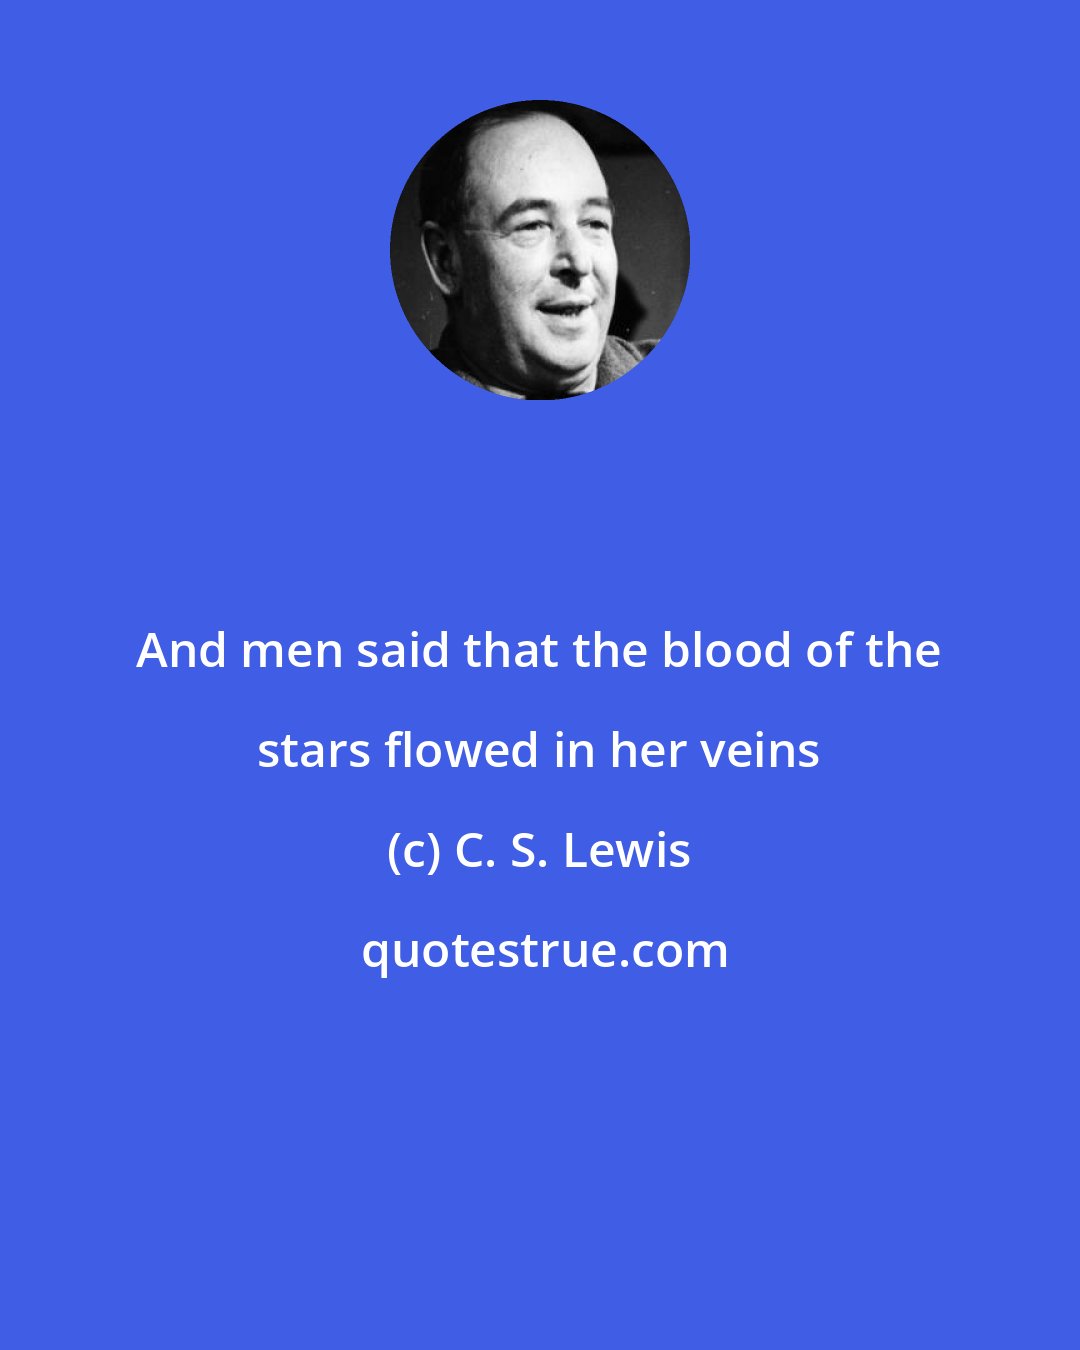 C. S. Lewis: And men said that the blood of the stars flowed in her veins